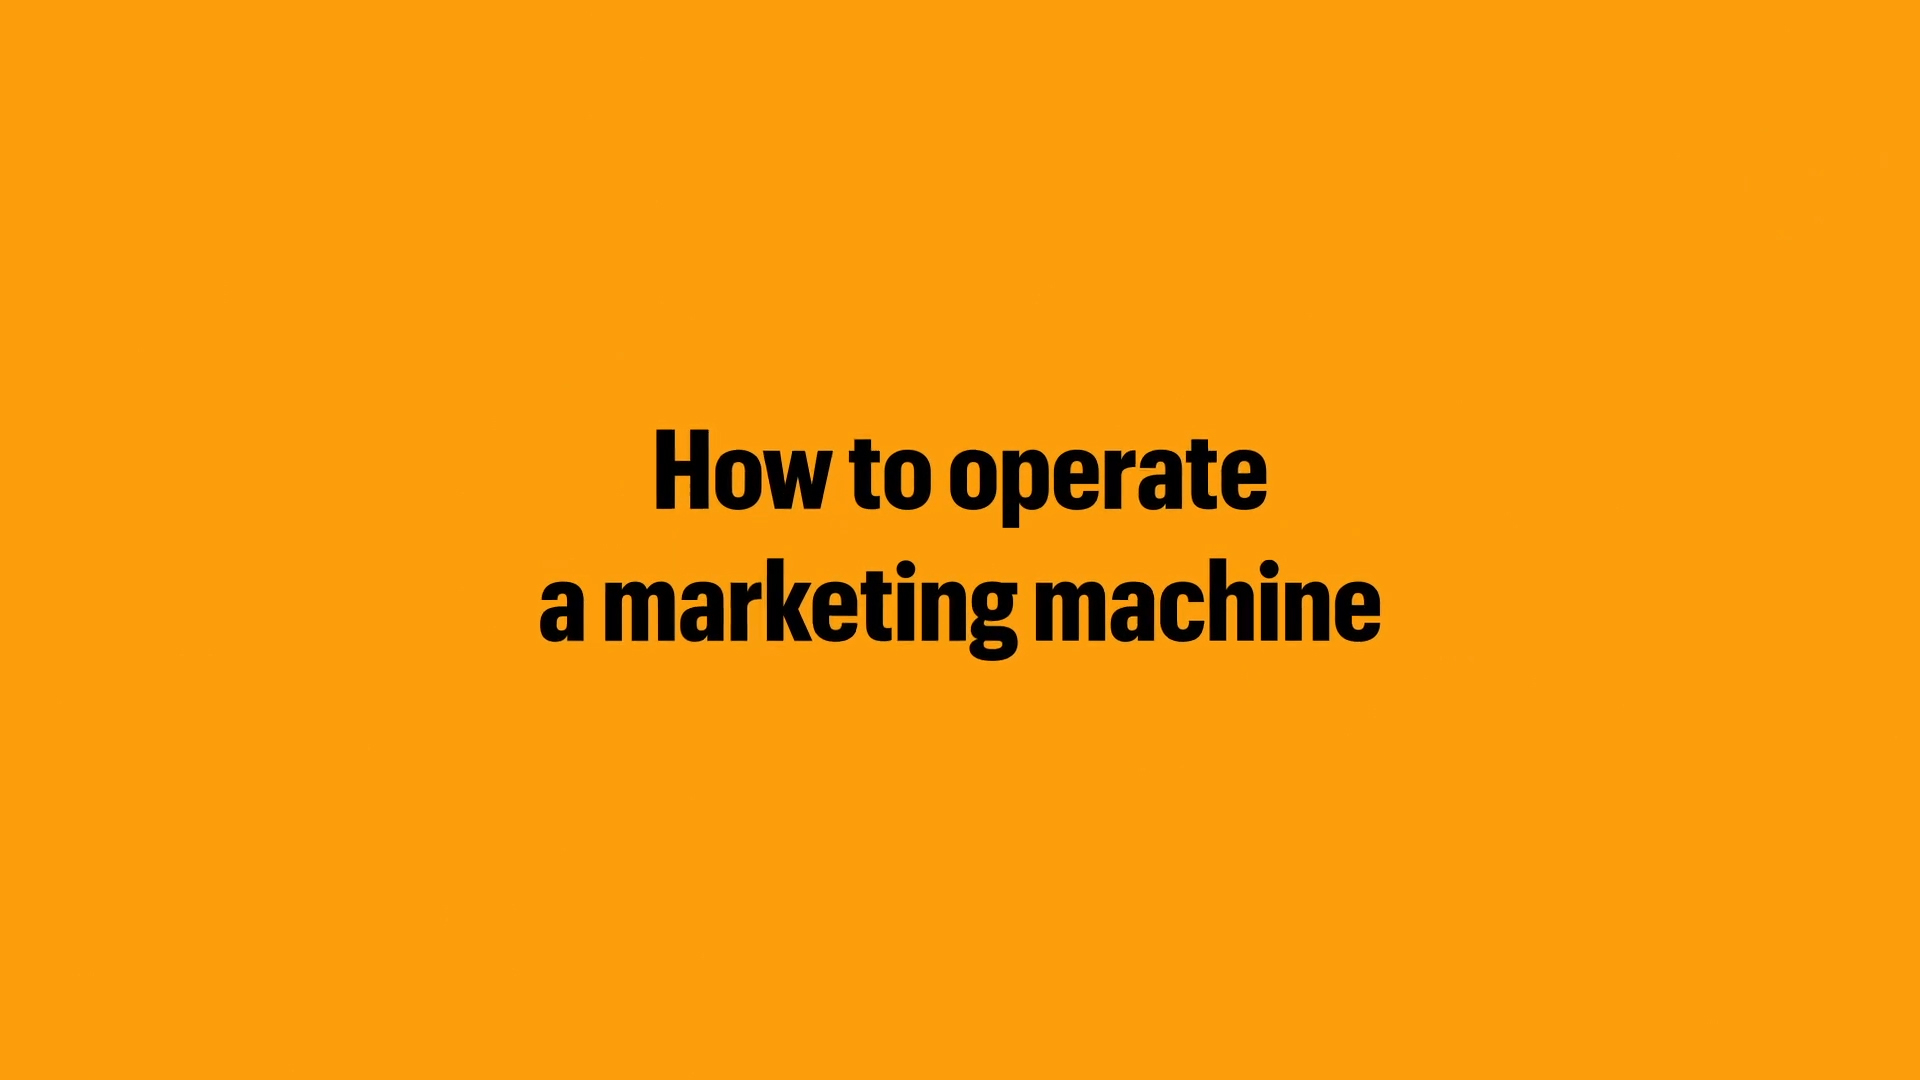 Quad ensures your marketing machine runs as frictionless as possible.